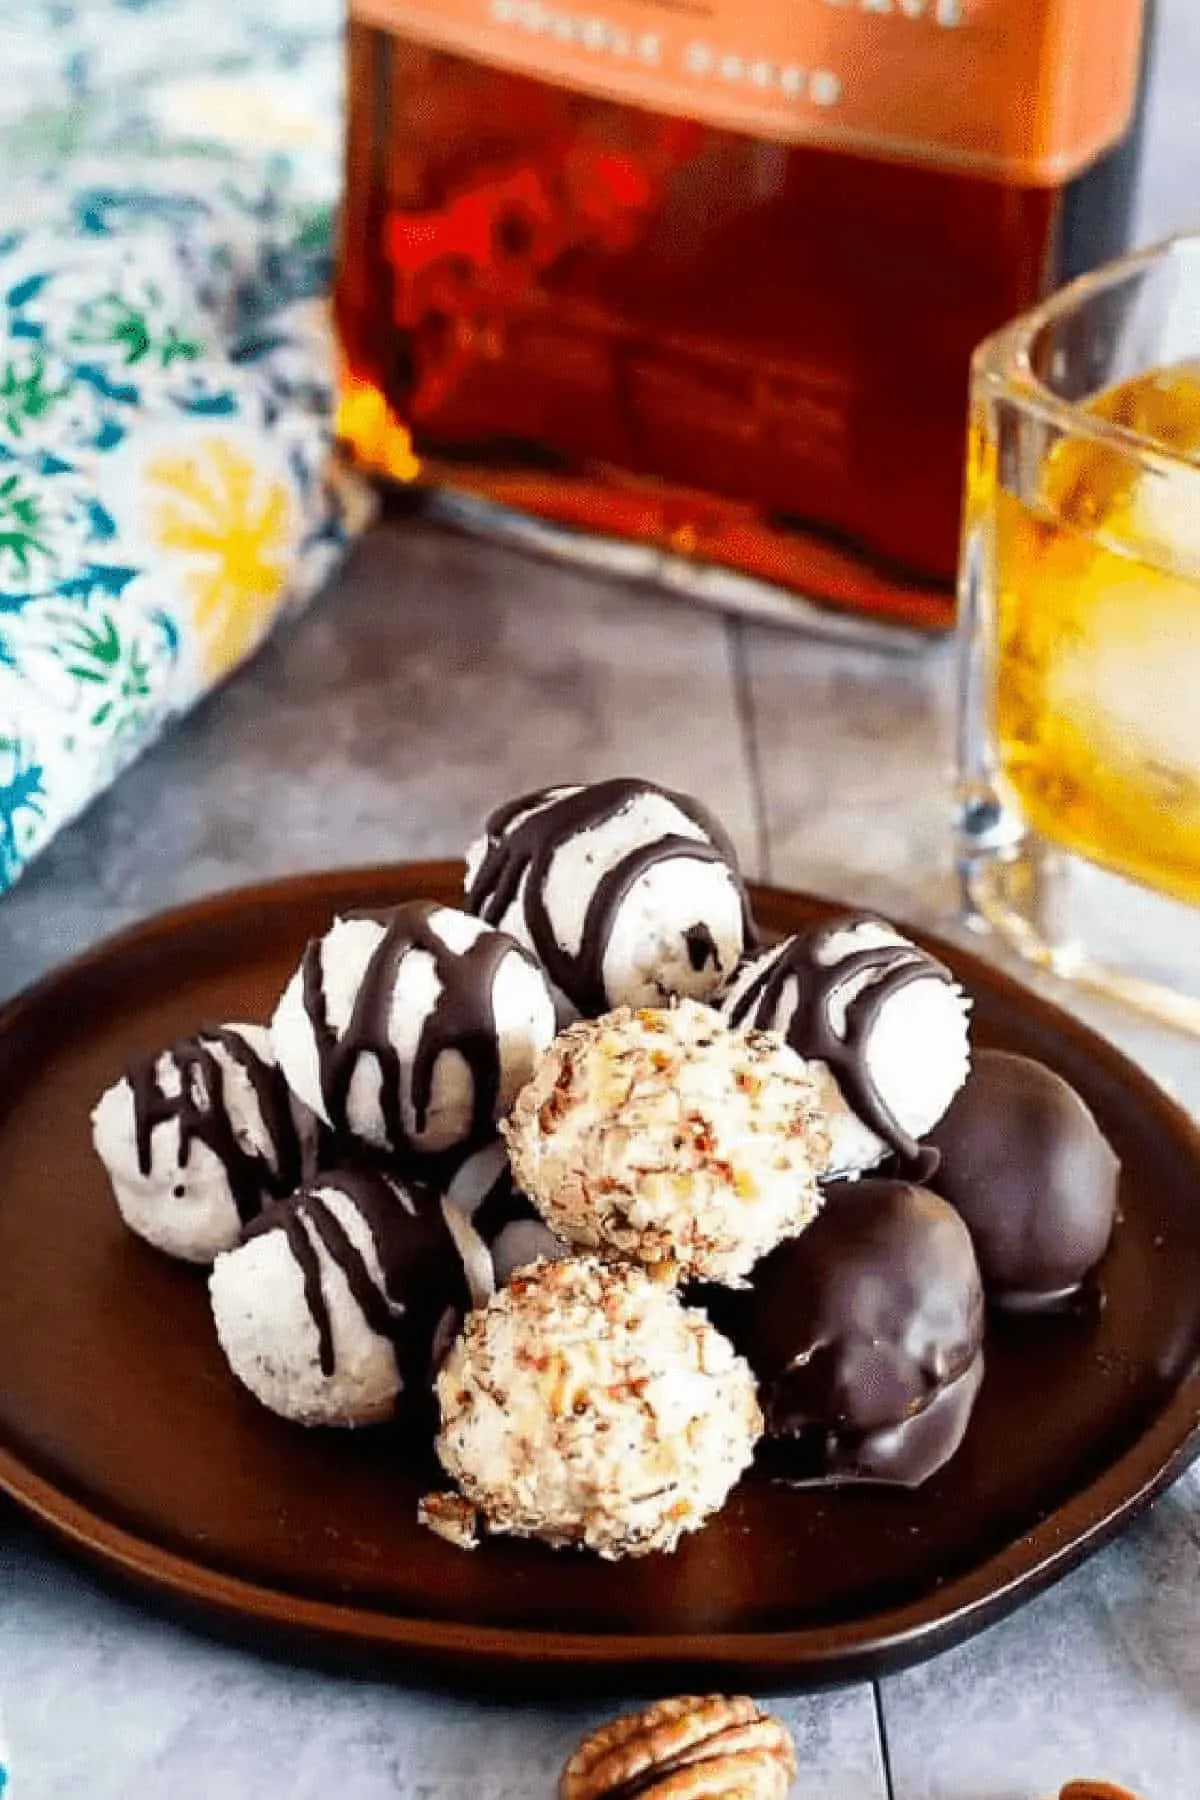 bourbon balls made with woodford reserve bourbon